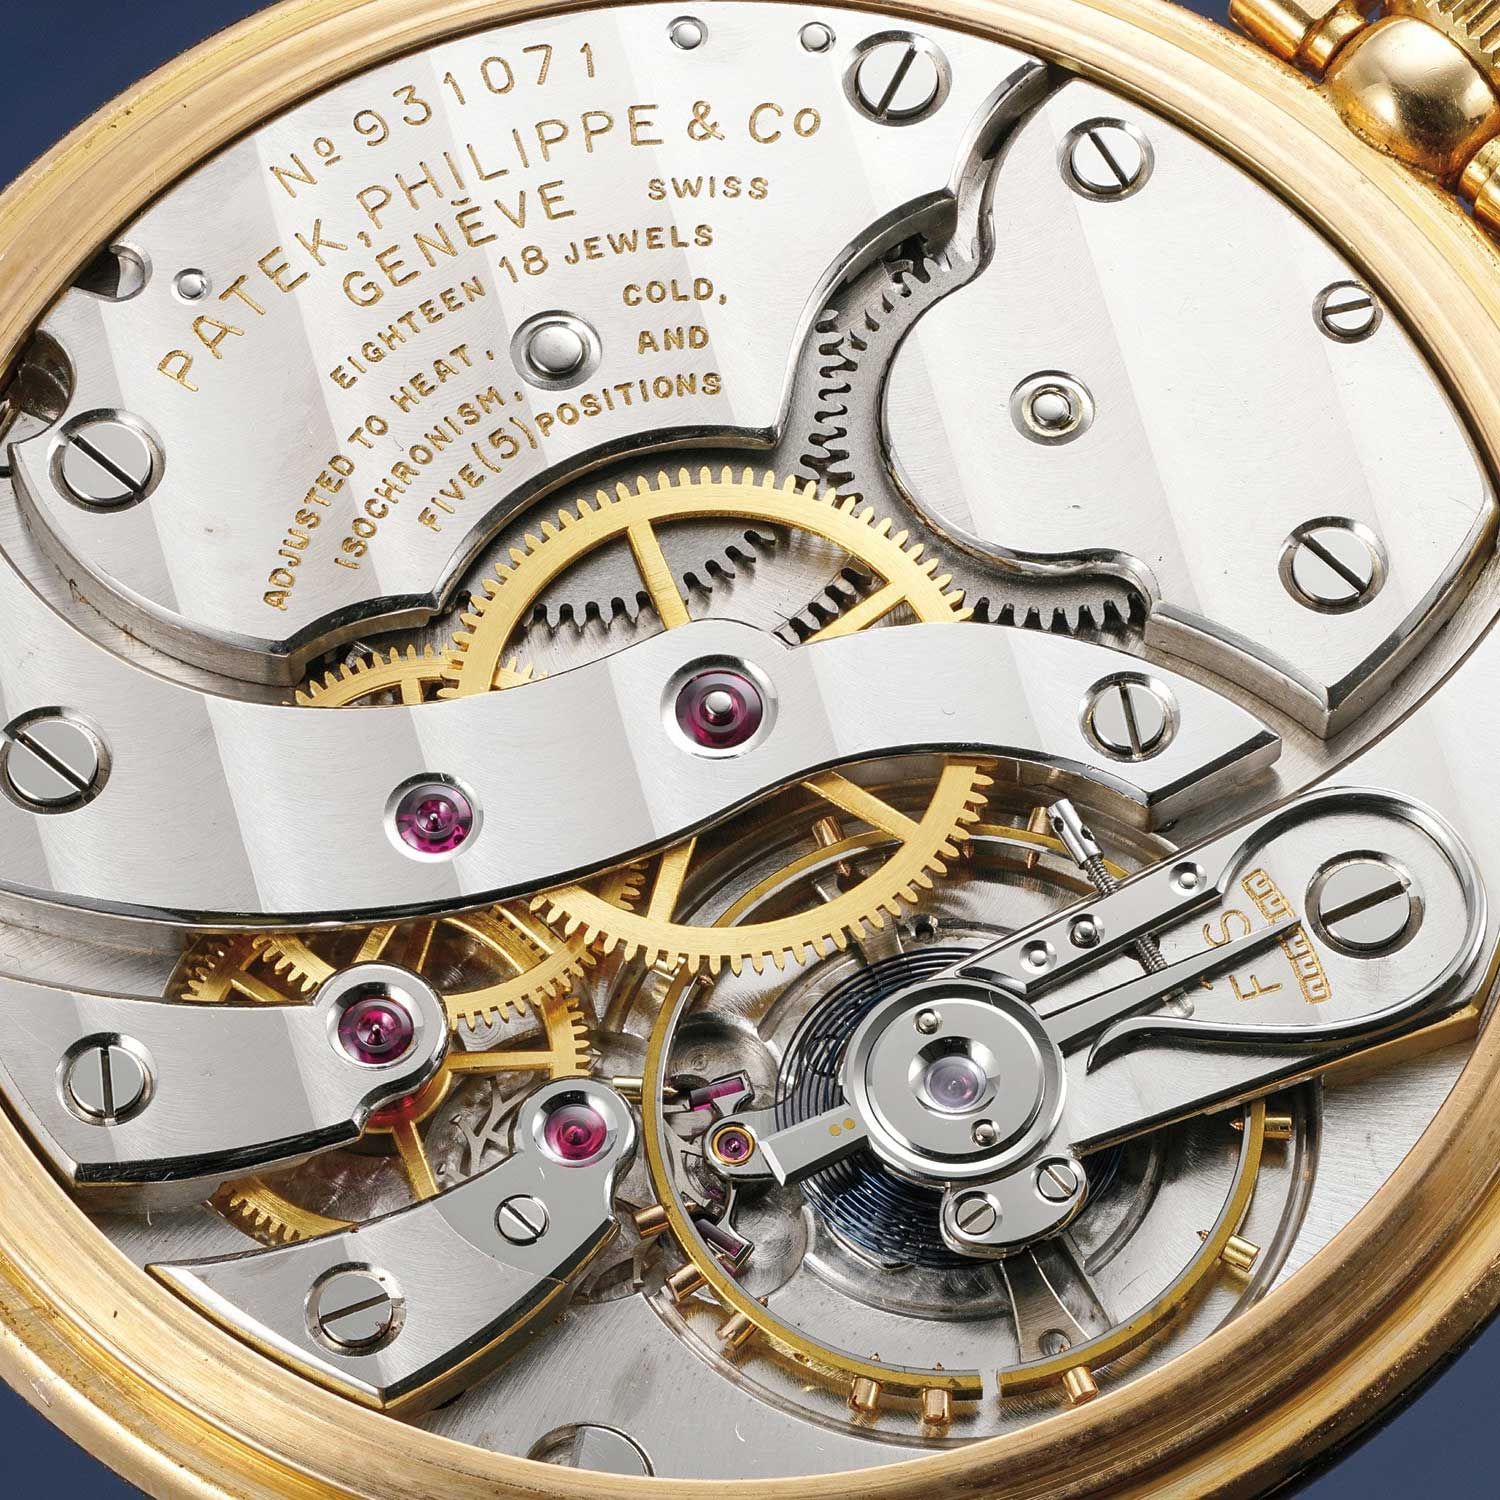 1937 onwards, for a total of 20 years, Cottier created around 90 605 HU World Time pocket watch movements. Seen here is the caliber 17-170HU which is the Cottier complication built on top of a 17 ligne Patek pocket watch caliber. (Image: Phillips)